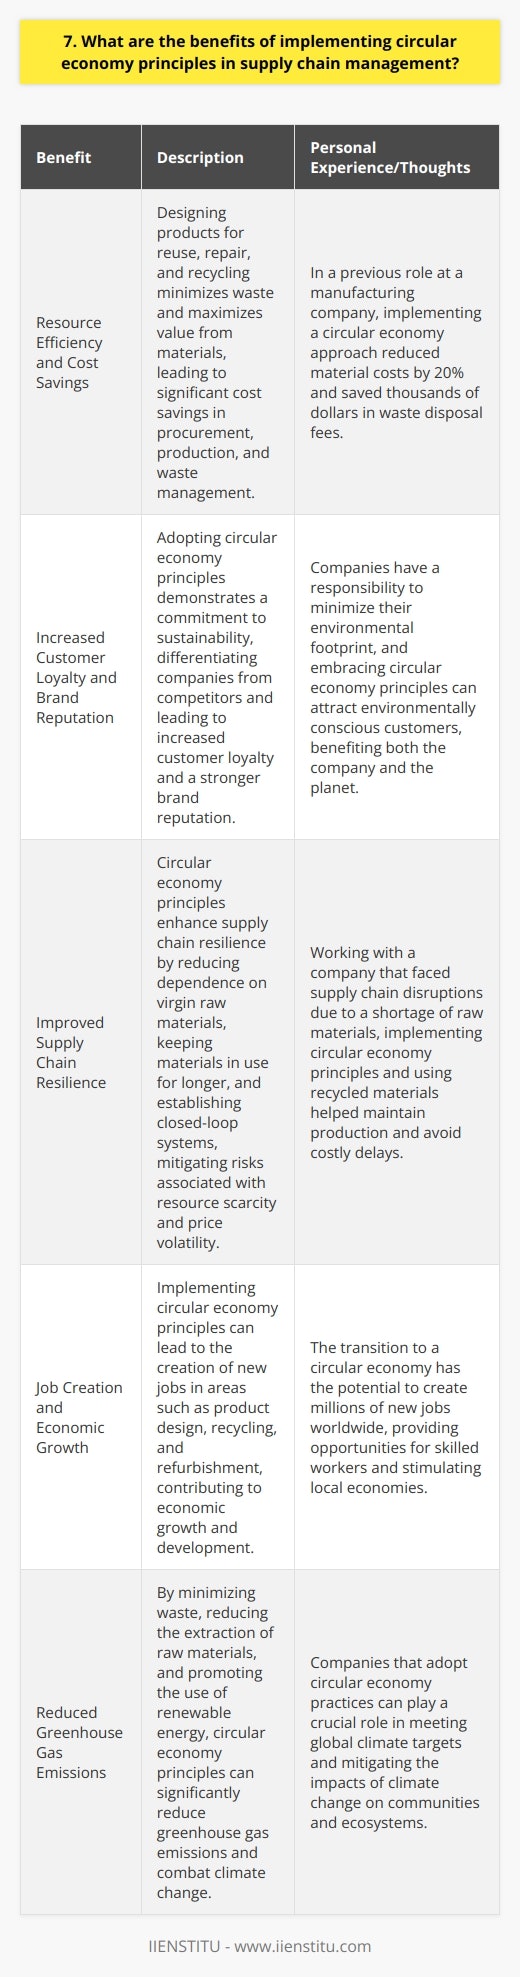 Implementing circular economy principles in supply chain management offers numerous benefits for companies. By adopting these principles, businesses can reduce their environmental impact while also improving their bottom line. Here are some of the key advantages: Resource Efficiency and Cost Savings Circular economy principles encourage the efficient use of resources. By designing products for reuse, repair, and recycling, companies can minimize waste and extract maximum value from materials. This leads to significant cost savings in procurement, production, and waste management. Example from personal experience: In my previous role at a manufacturing company, we implemented a circular economy approach in our supply chain. We redesigned our products to use fewer raw materials and made them easily recyclable. As a result, we reduced our material costs by 20% and saved thousands of dollars in waste disposal fees. Increased Customer Loyalty and Brand Reputation Consumers are increasingly conscious of the environmental impact of their purchases. By adopting circular economy principles, companies can demonstrate their commitment to sustainability and differentiate themselves from competitors. This can lead to increased customer loyalty and a stronger brand reputation. Personal thoughts: I believe that companies have a responsibility to minimize their environmental footprint. By embracing circular economy principles, businesses can not only reduce their impact but also attract environmentally conscious customers. Its a win-win situation that benefits both the company and the planet. Improved Supply Chain Resilience Circular economy principles can enhance supply chain resilience by reducing dependence on virgin raw materials. By keeping materials in use for longer and establishing closed-loop systems, companies can mitigate risks associated with resource scarcity and price volatility. Personal example: I once worked with a company that faced supply chain disruptions due to a shortage of raw materials. By implementing circular economy principles and using recycled materials, we were able to maintain production and avoid costly delays. In conclusion, implementing circular economy principles in supply chain management offers significant benefits. From cost savings and resource efficiency to improved customer loyalty and supply chain resilience, these principles can help companies thrive in a sustainable and competitive business landscape.